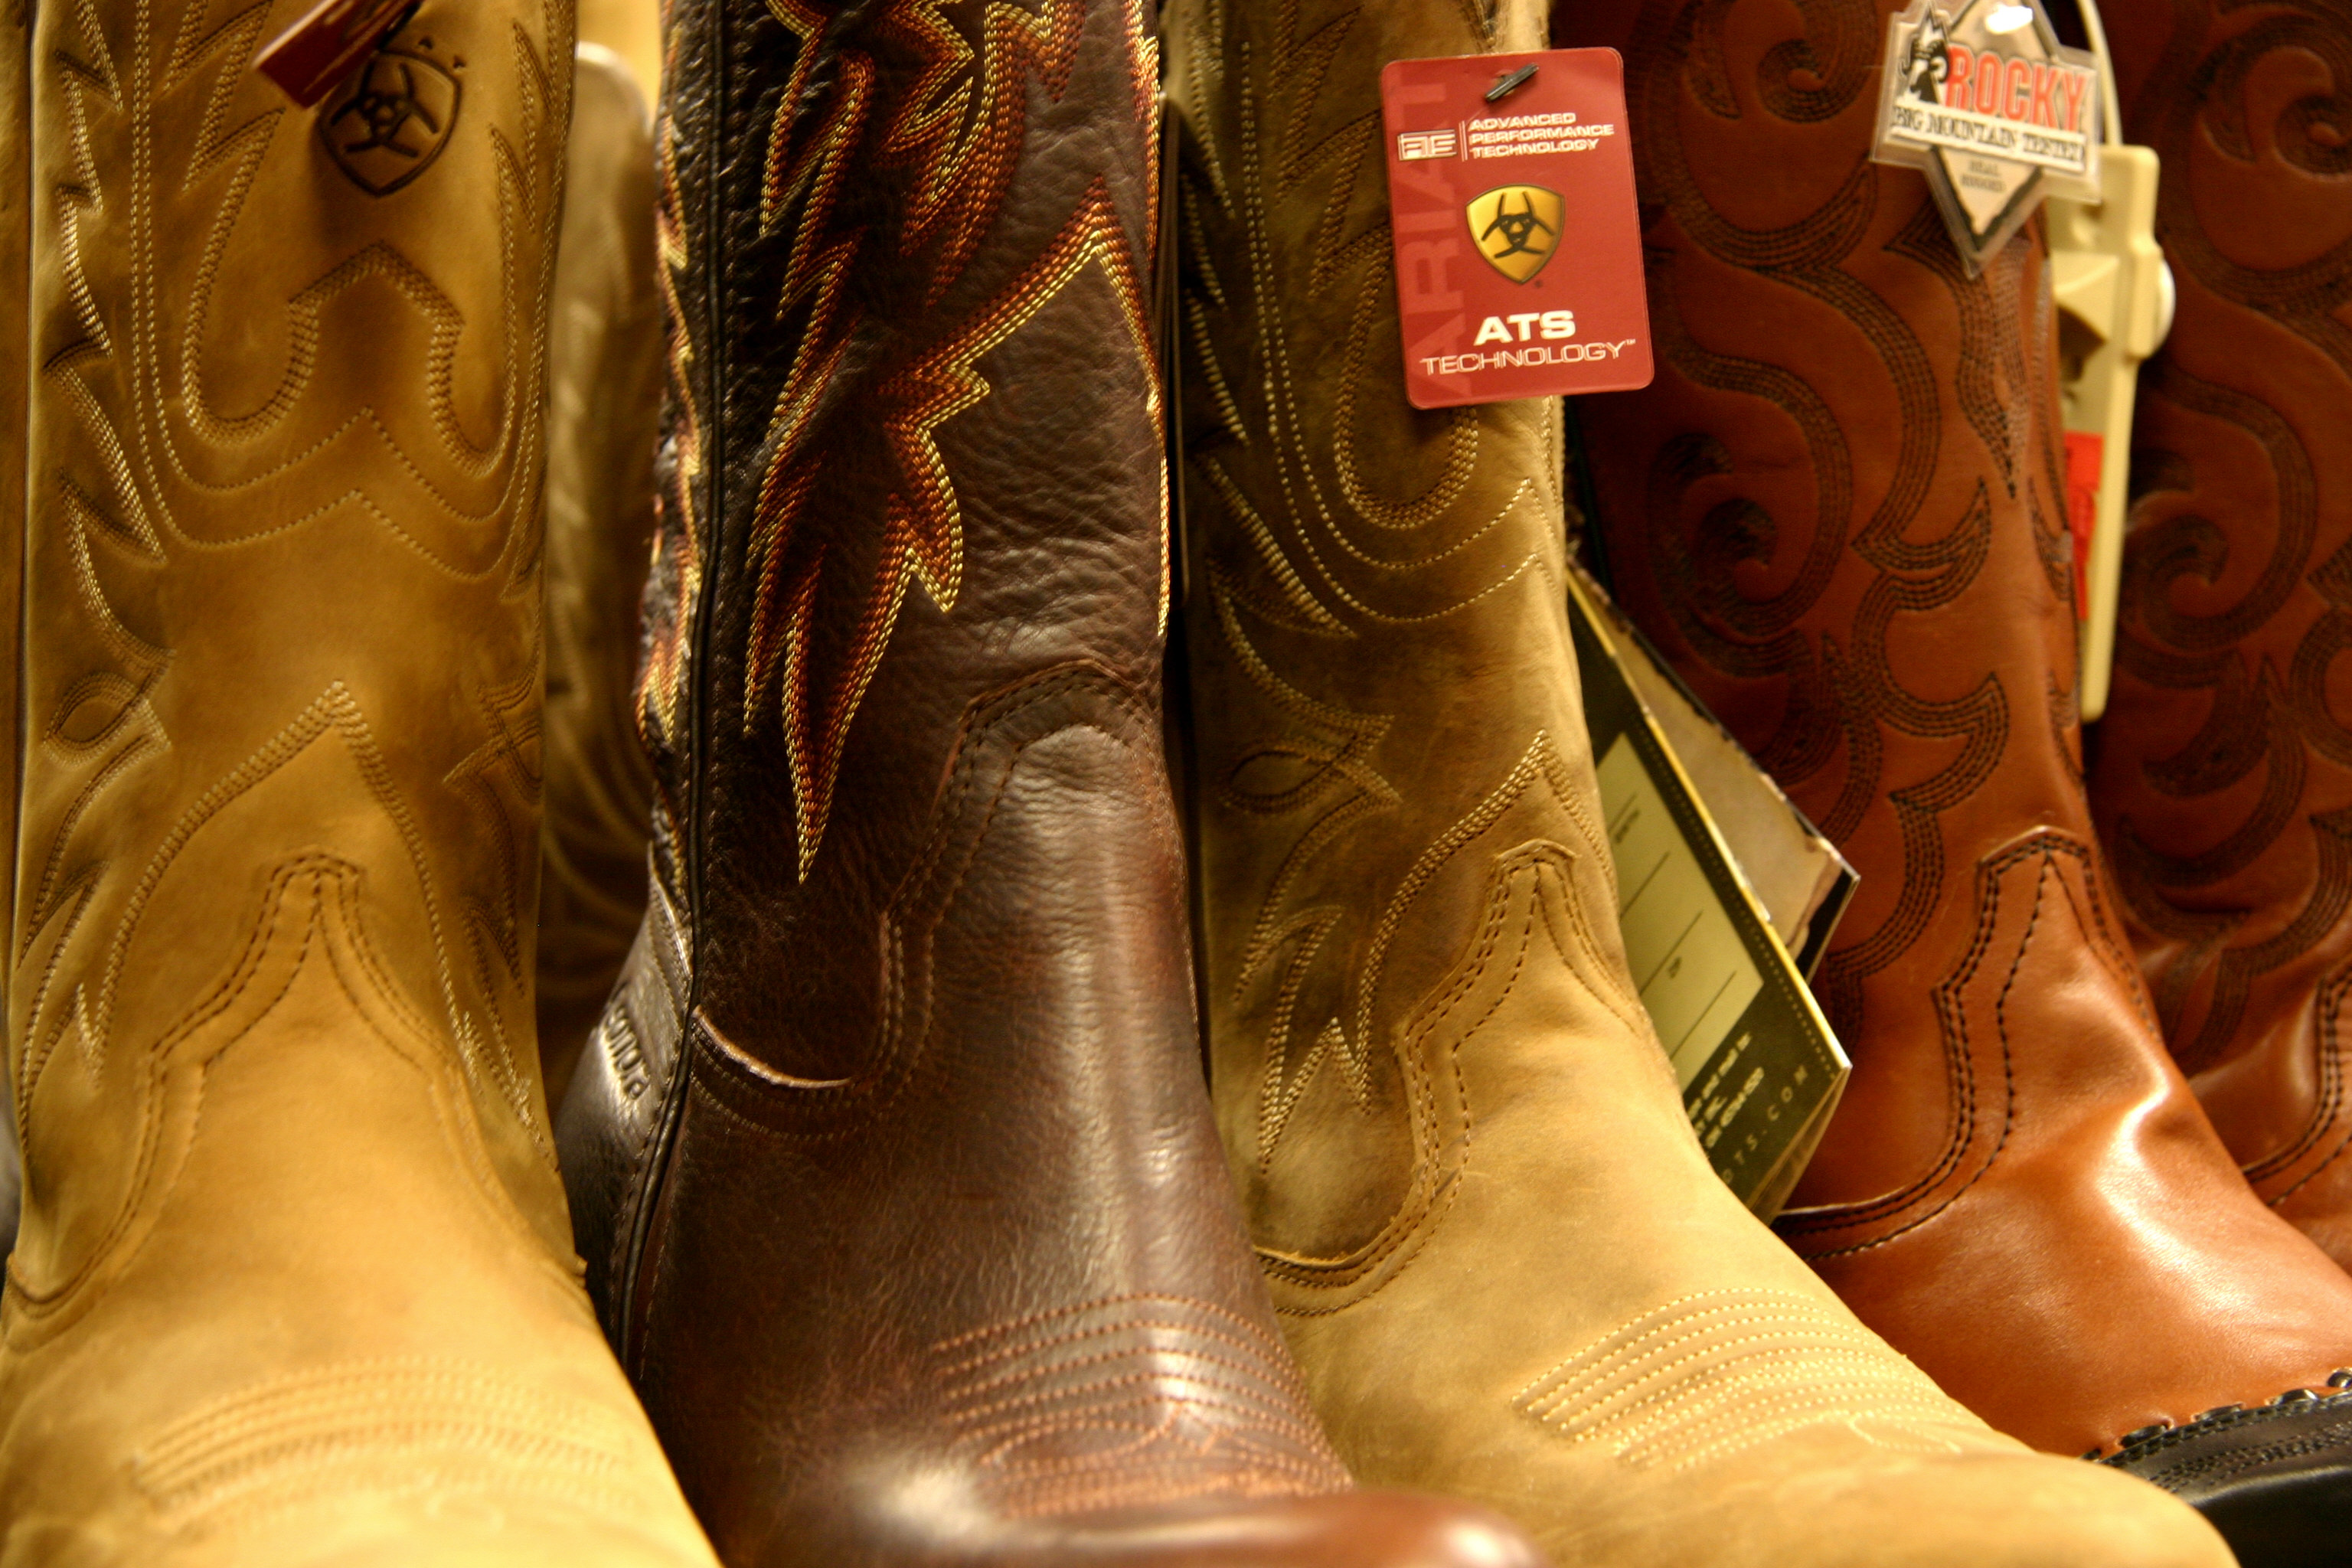 Shopping for boots at Murdochs.